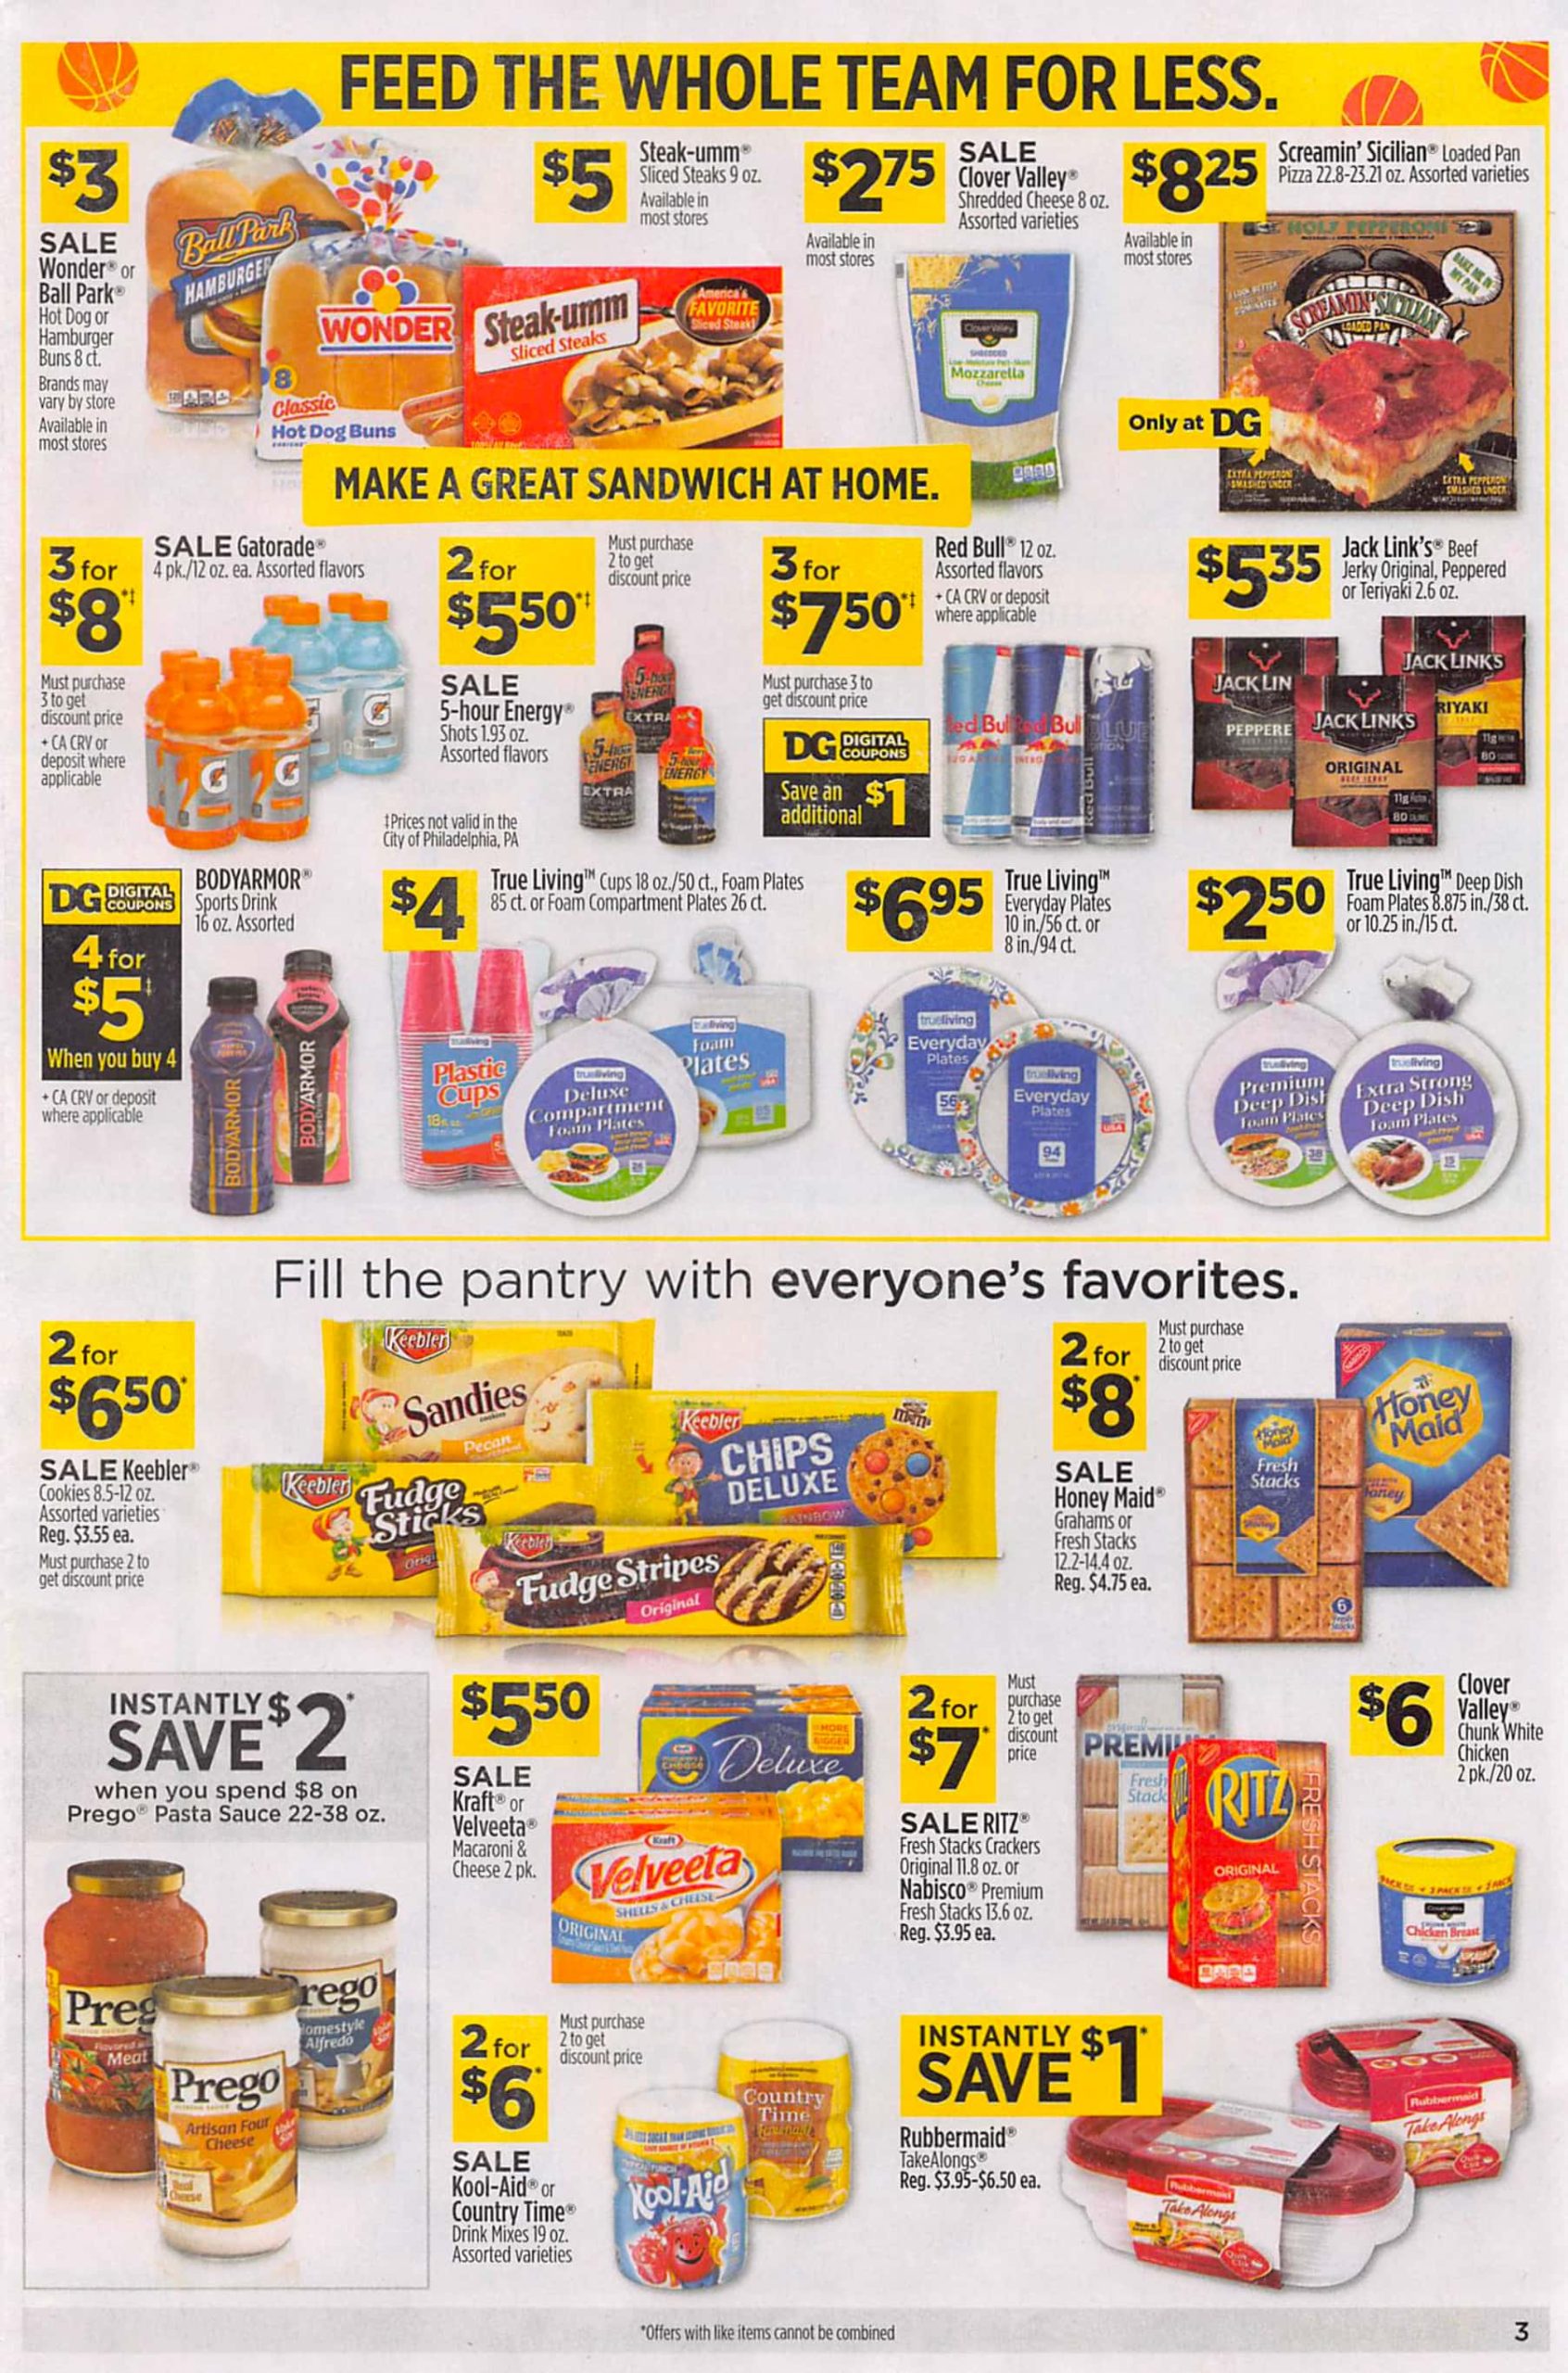 Dollar General ad for this week Preview valid for March 26 - April 1, 2023